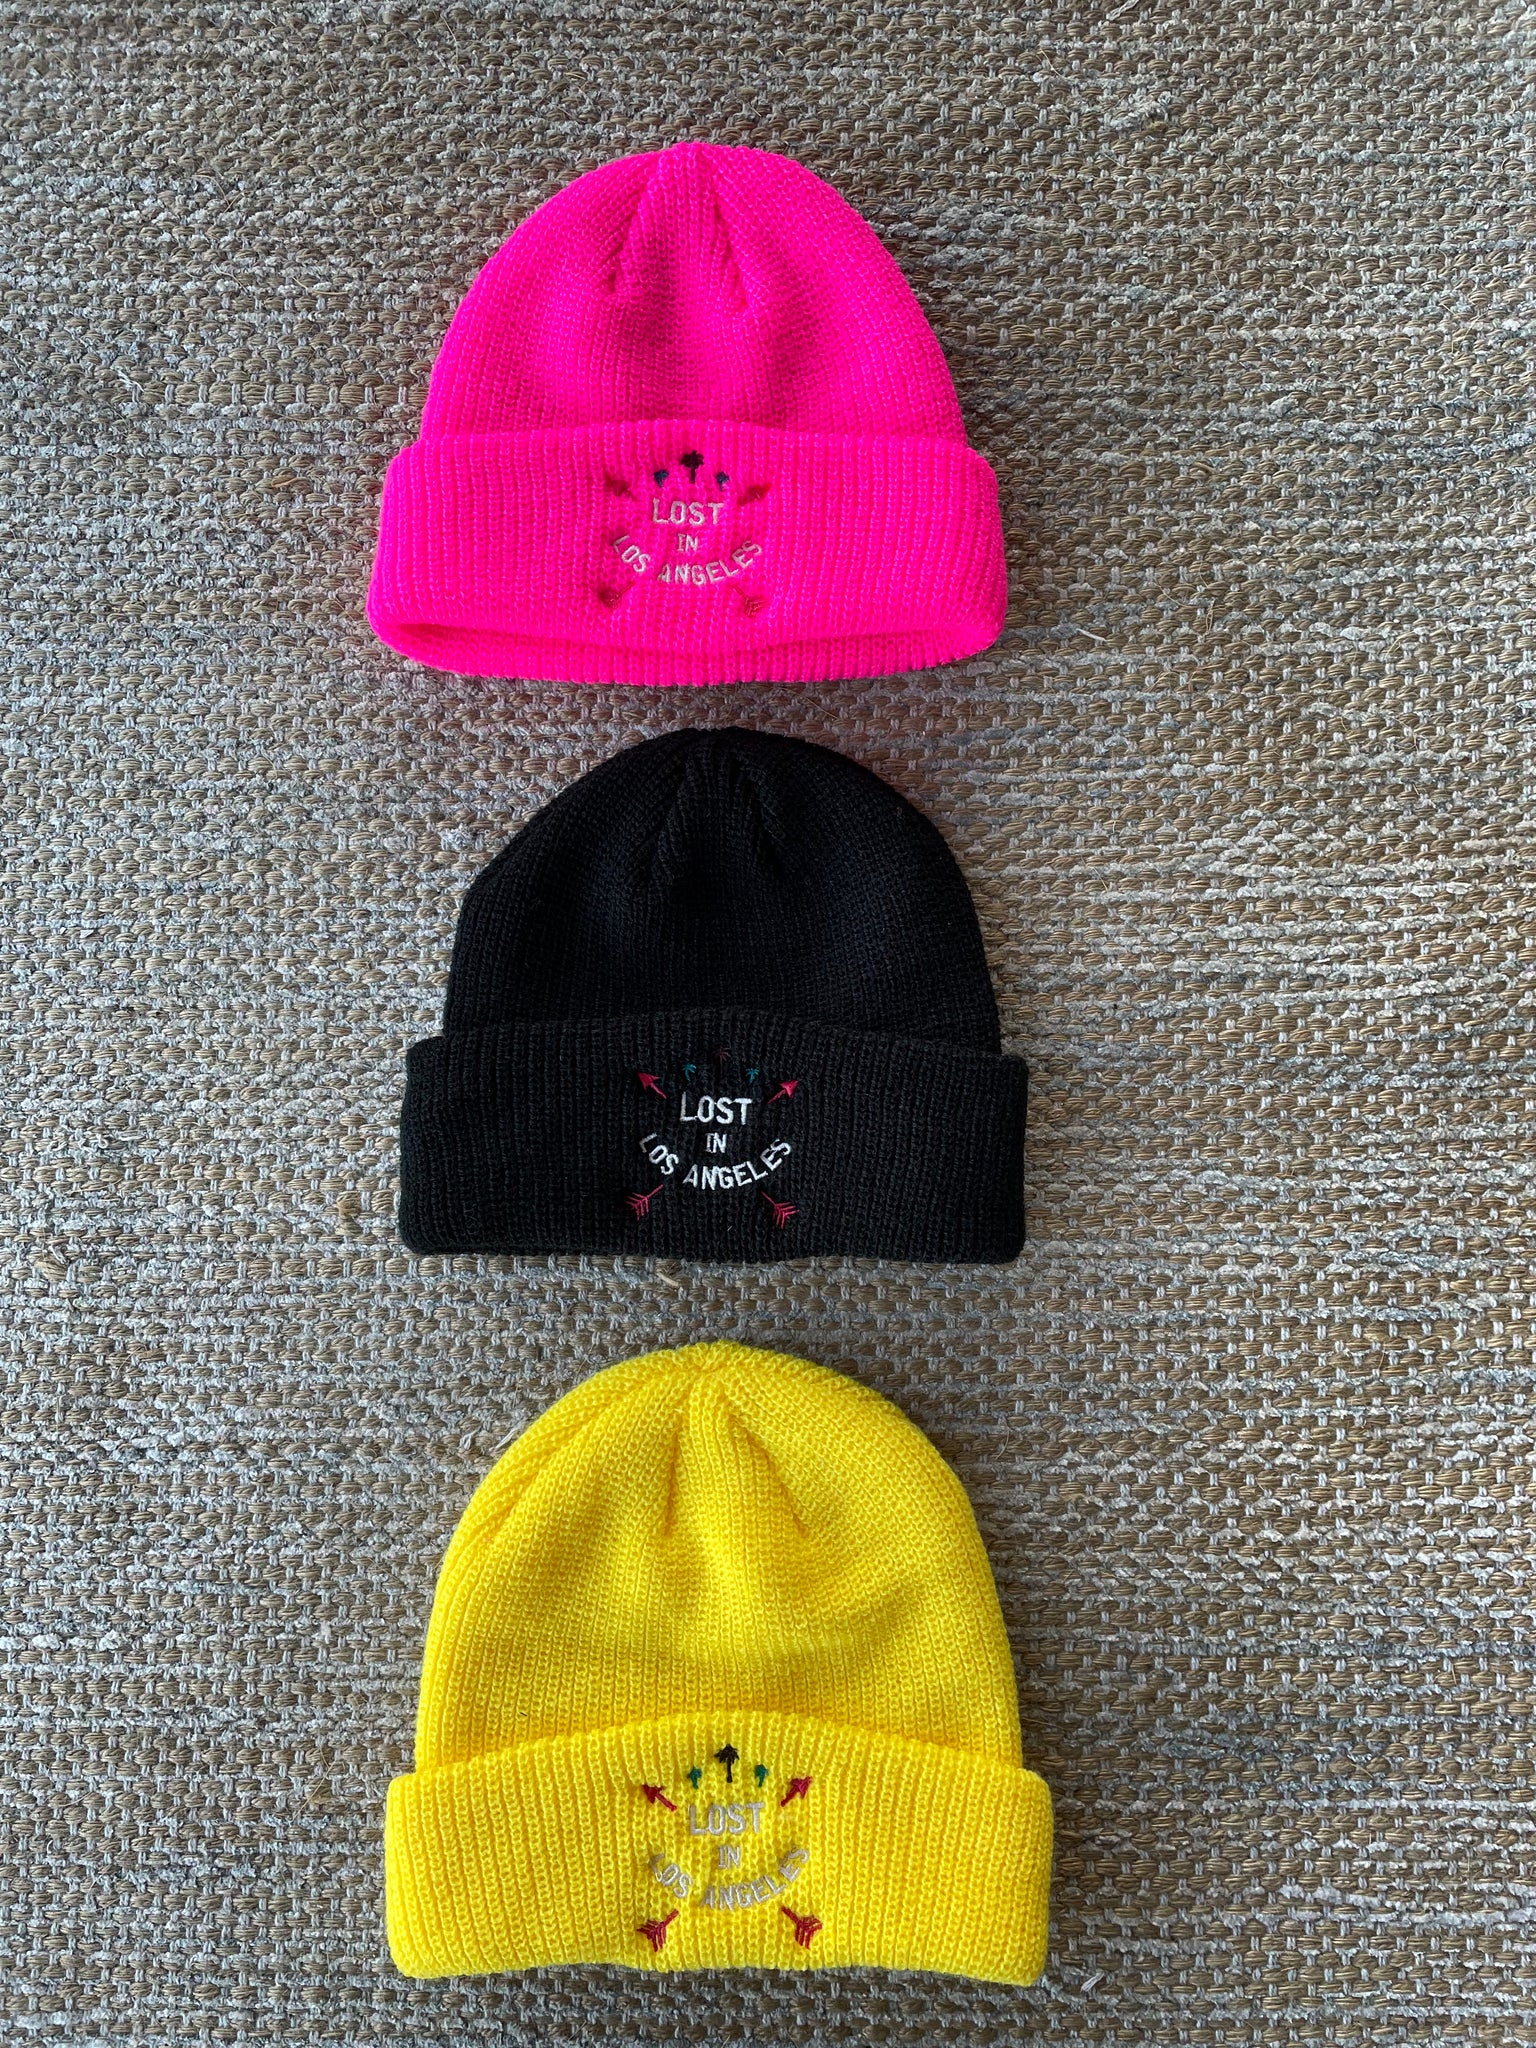 Lost in Los Angeles Beanie